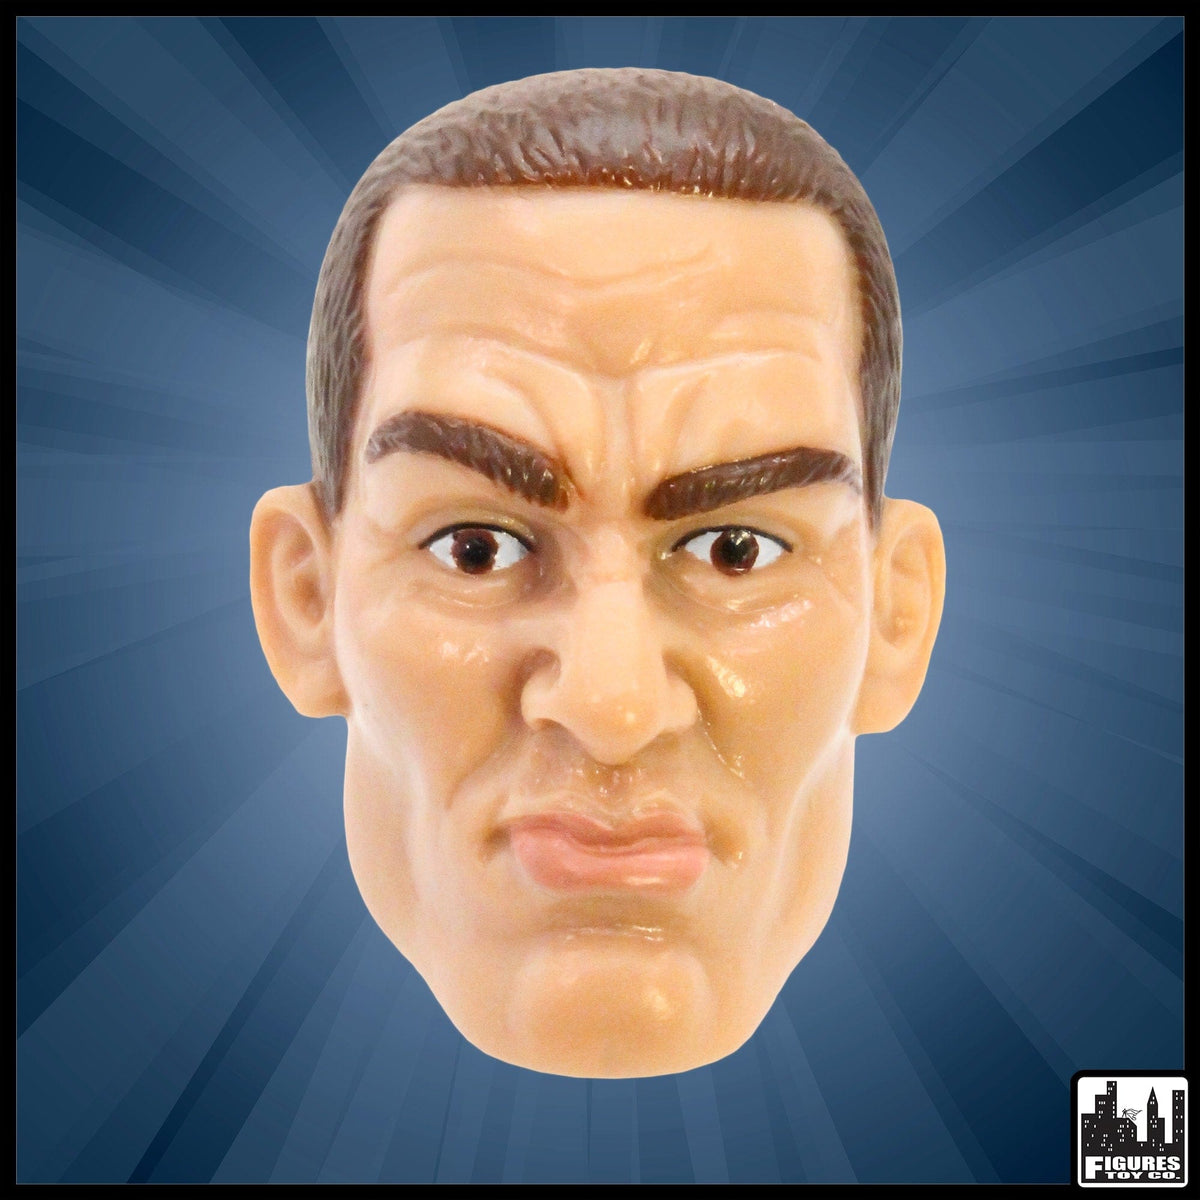 White Male Interchangeable Wrestling Action Figure Head With Brown Hair